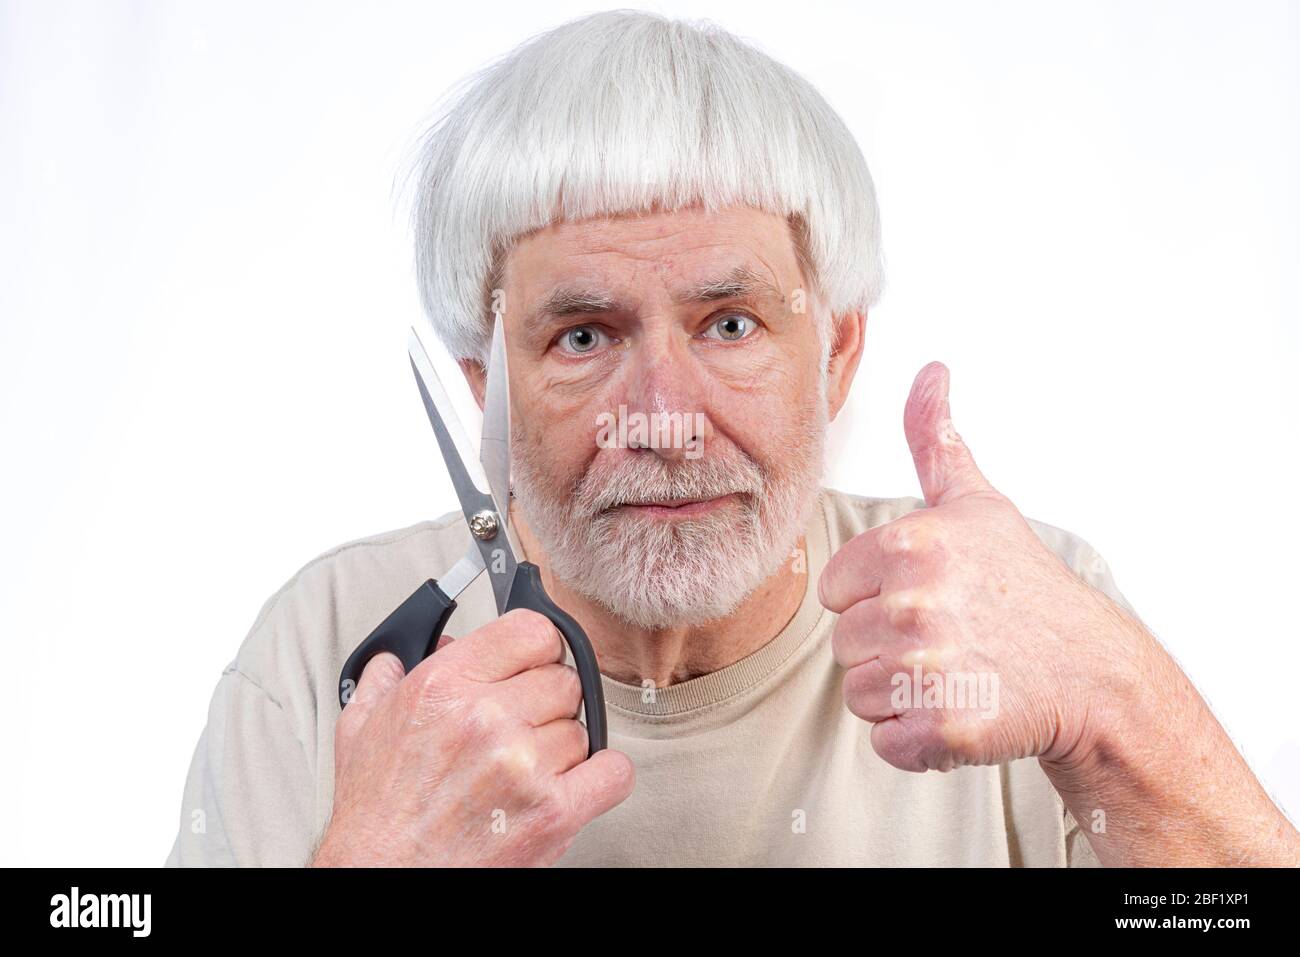 Horizontal shot of a gray haired man who’s been in quarantine too long finally approves the haircut he gave himself with a thumbs up. Stock Photo